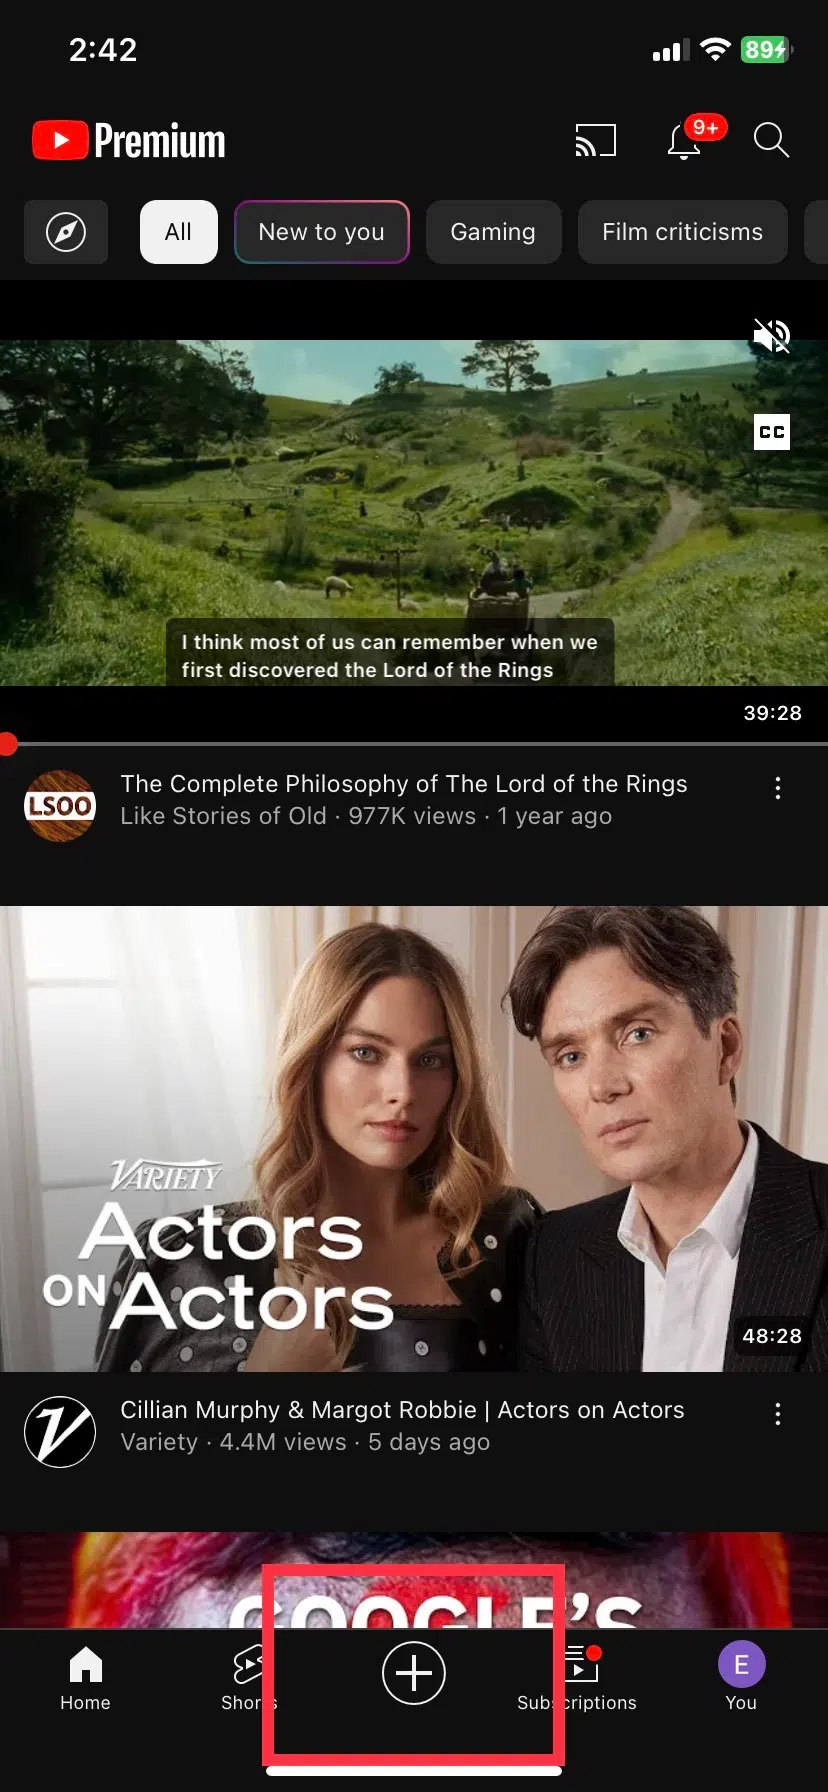 Plus icon on the main page of the YouTube app, used for creating new content.